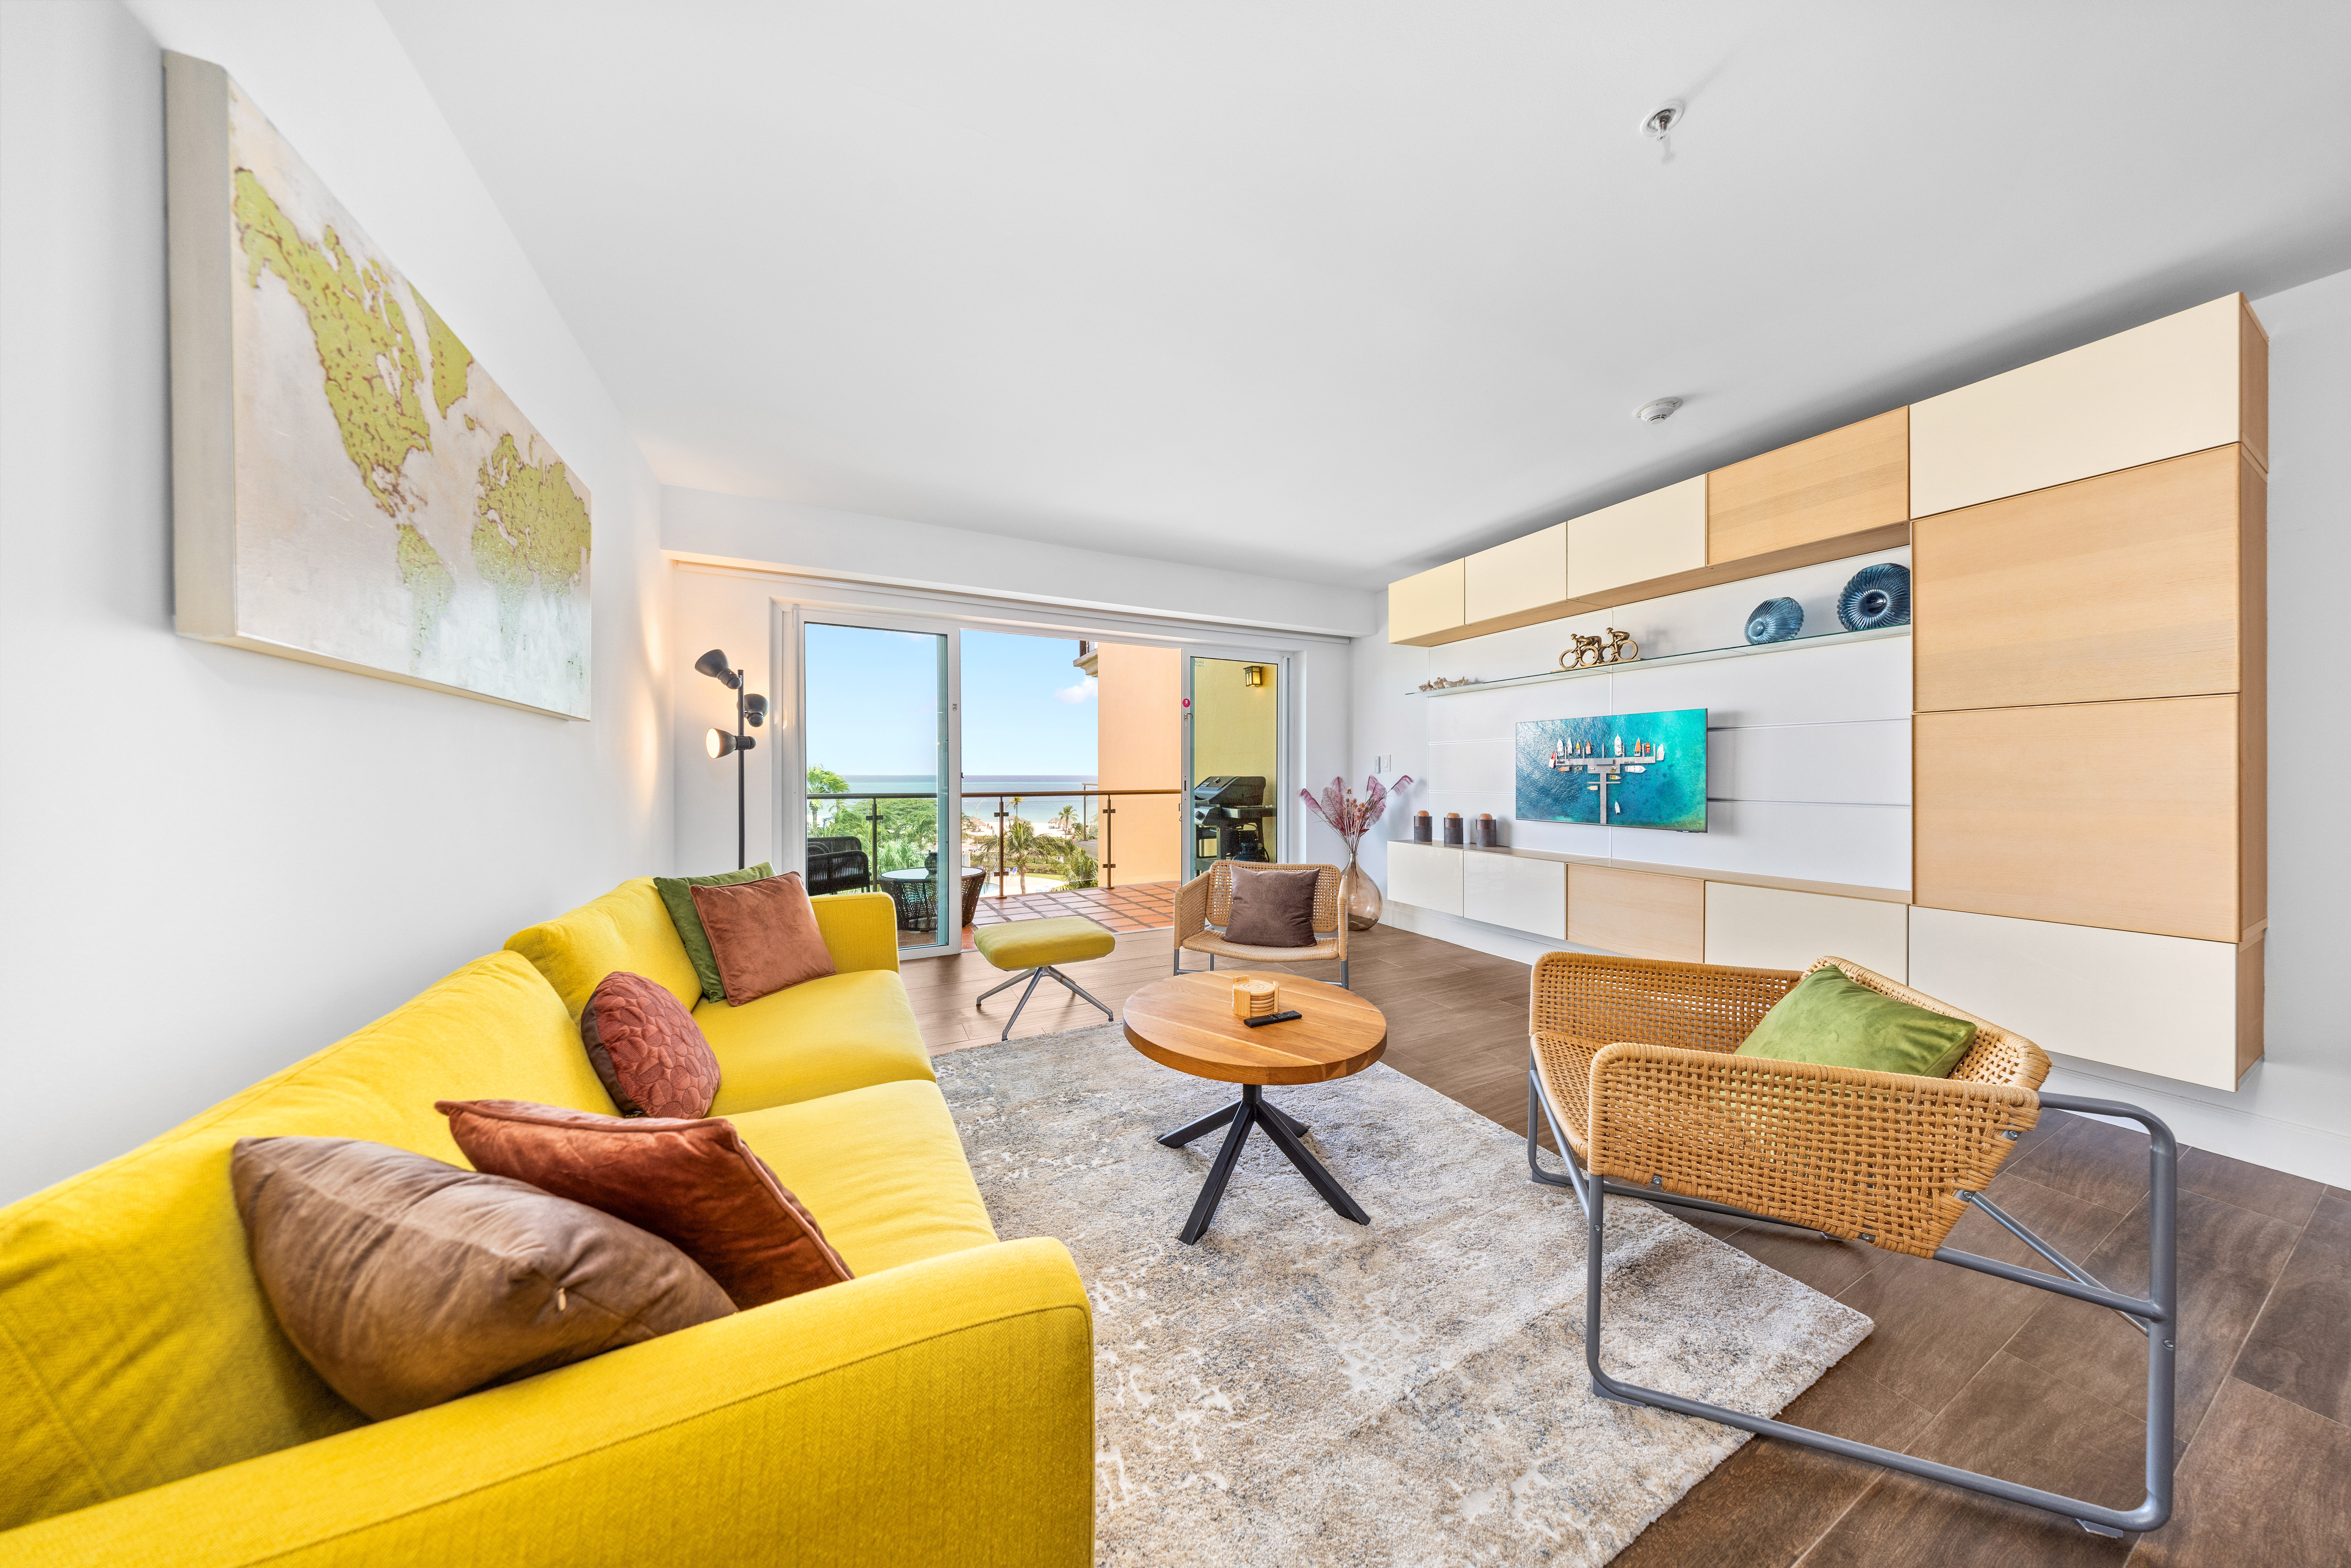 Stunning Living of the condo in Aruba - Comfy and cozy sofas - Bright and Airy Area